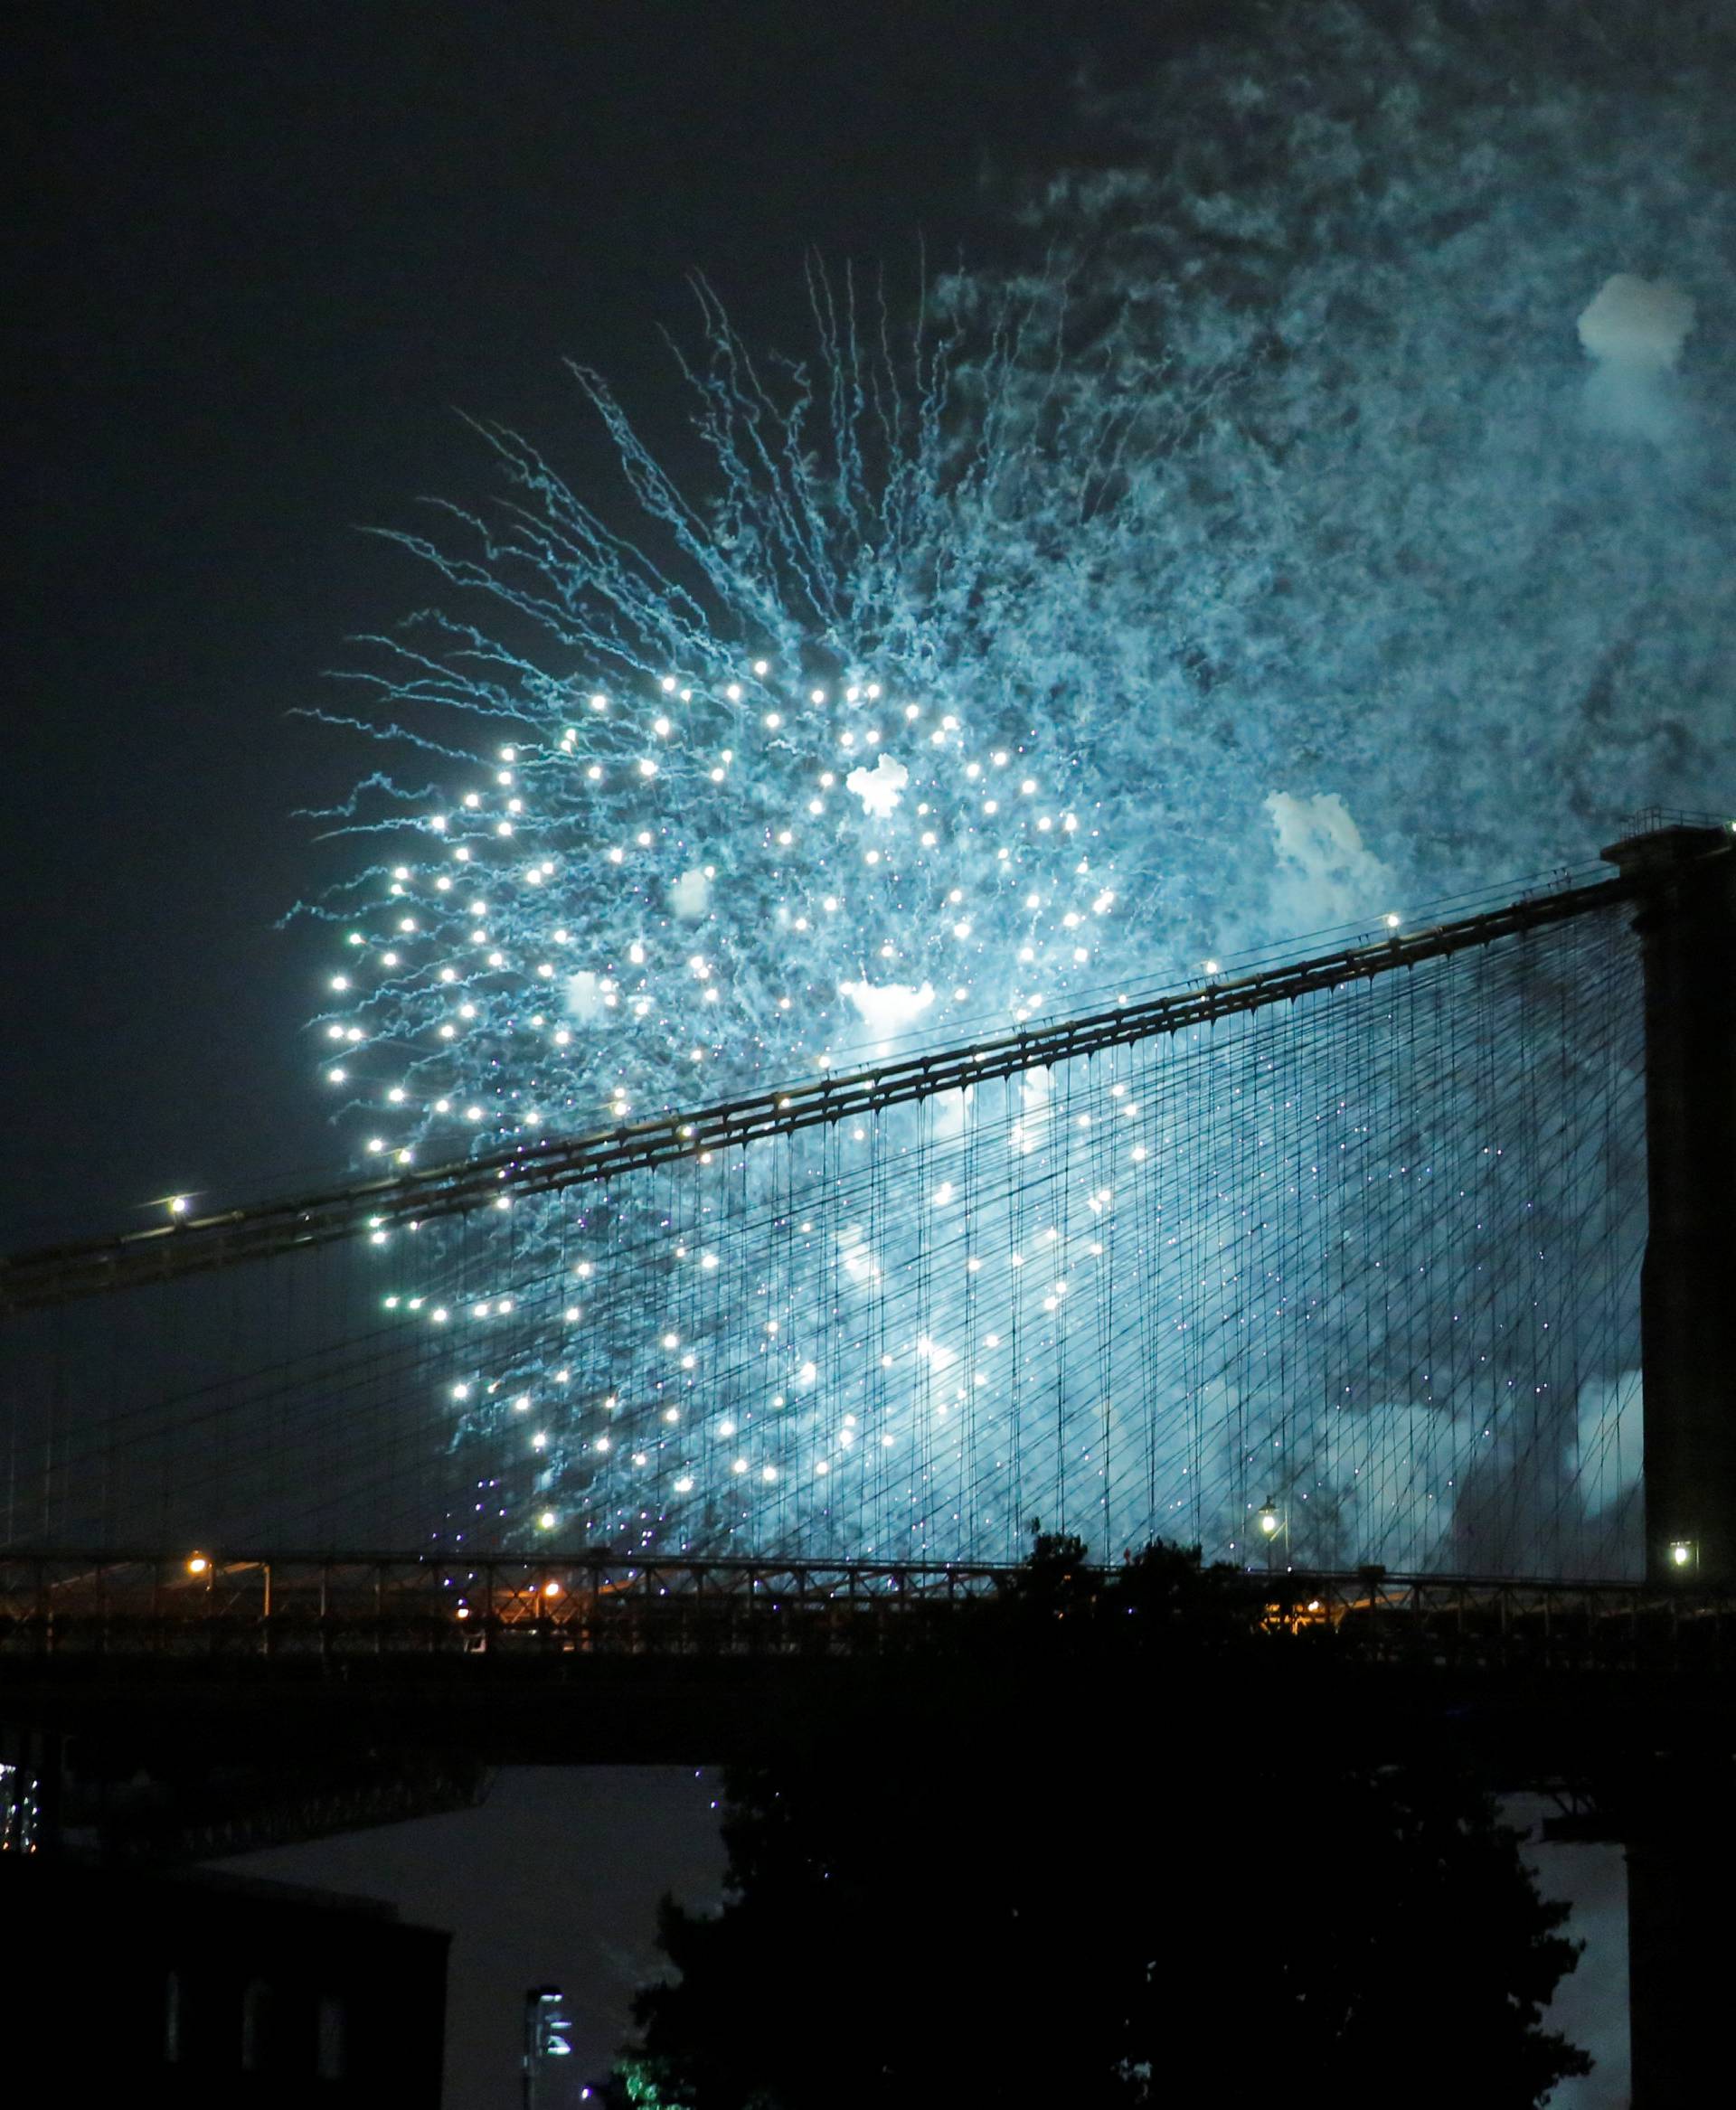 The Macy's 4th of July Fireworks explode behind the Brooklyn Bridge on the East River in New York, U.S.